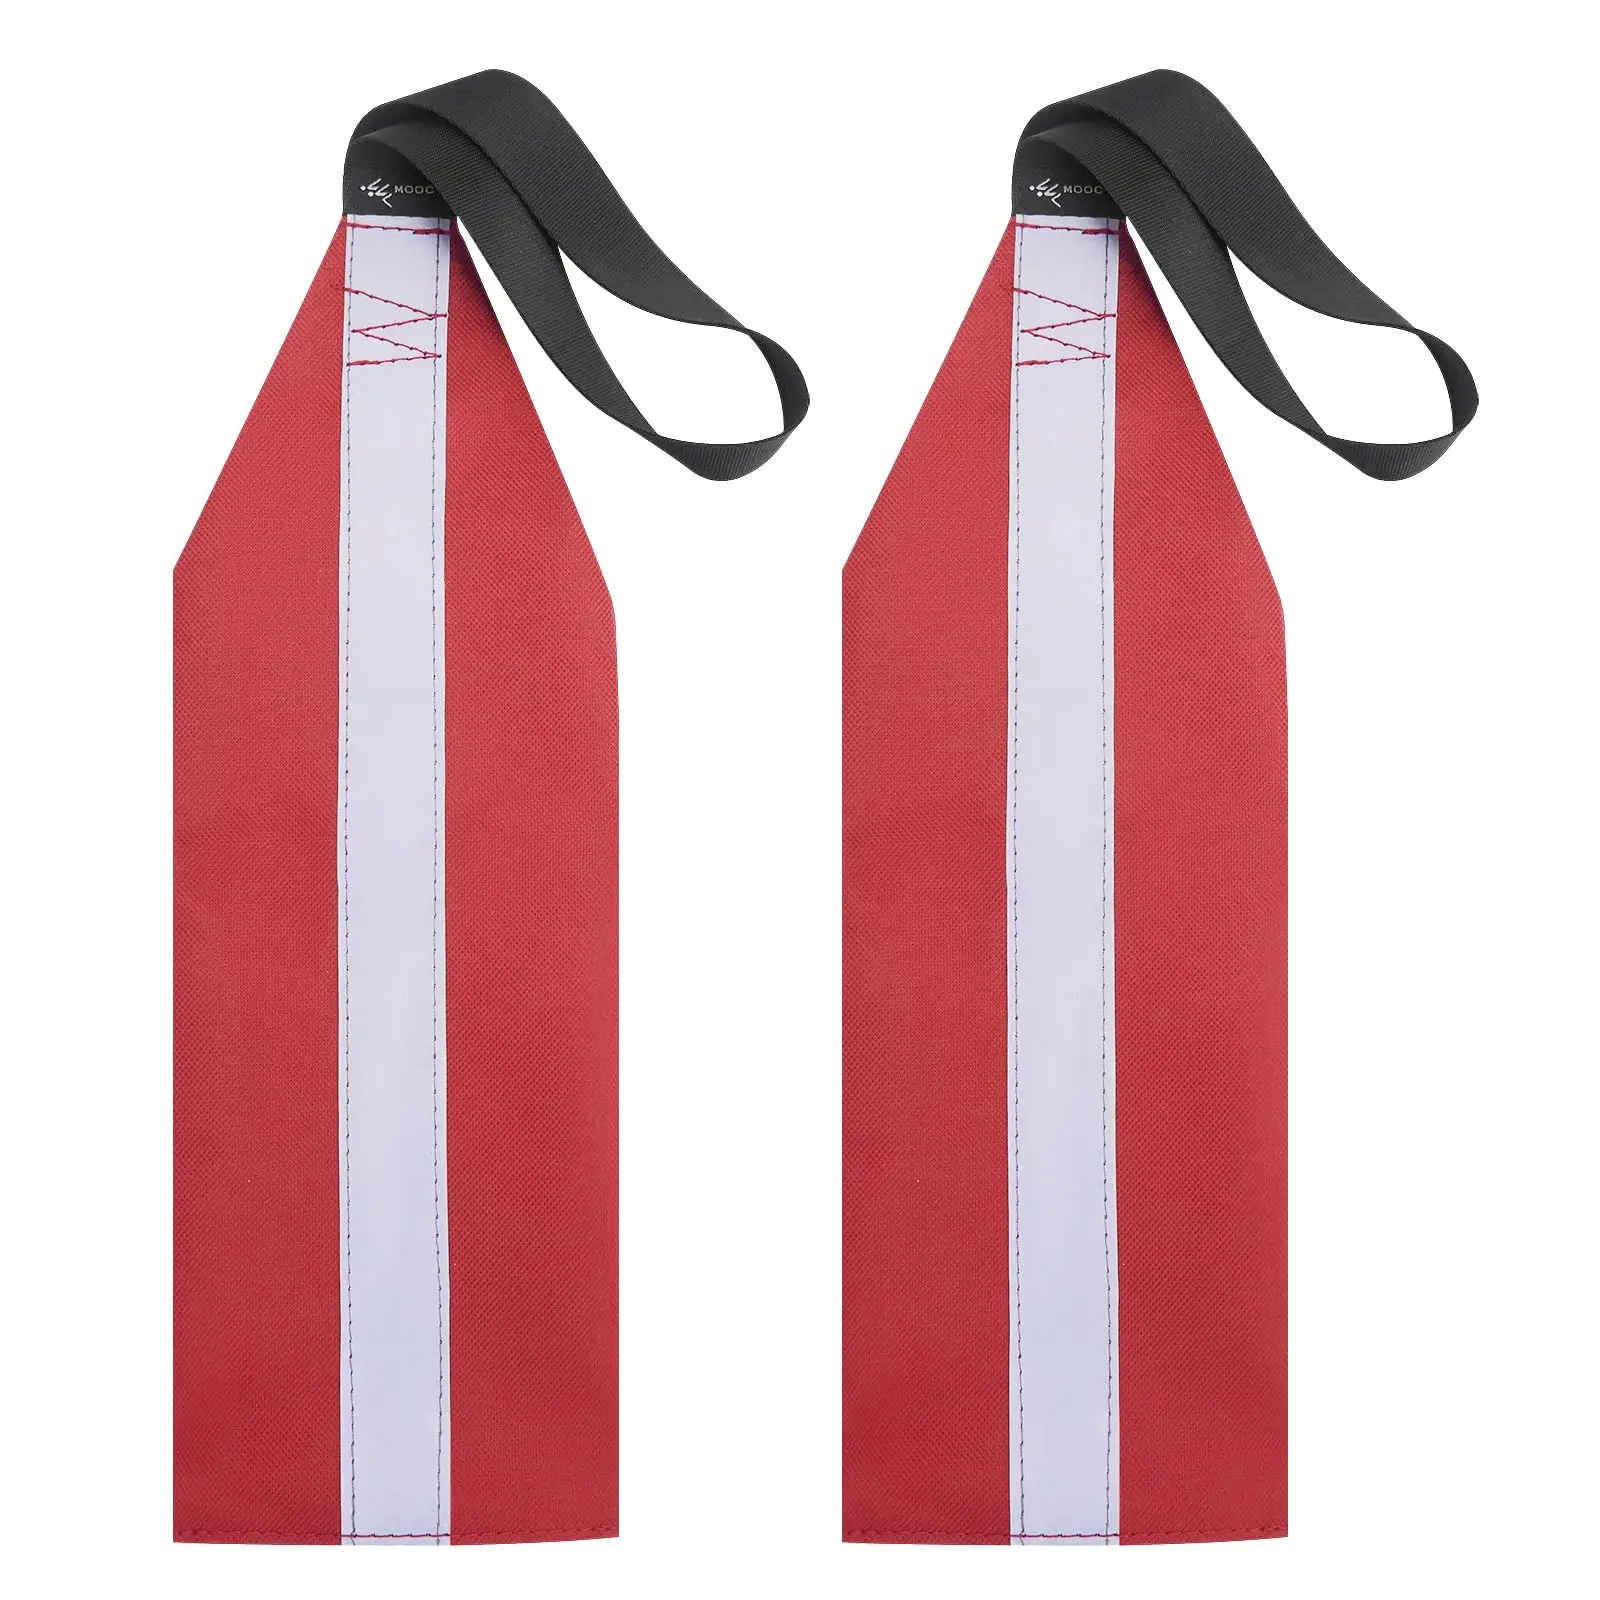 Red Flag Truck Loads (Pack of 2), Warning Flags for Kayak Safety Towing,Travel Trailer Tow Accessories 2pcs warning signal flags traffic safety signal flag commander signal flags